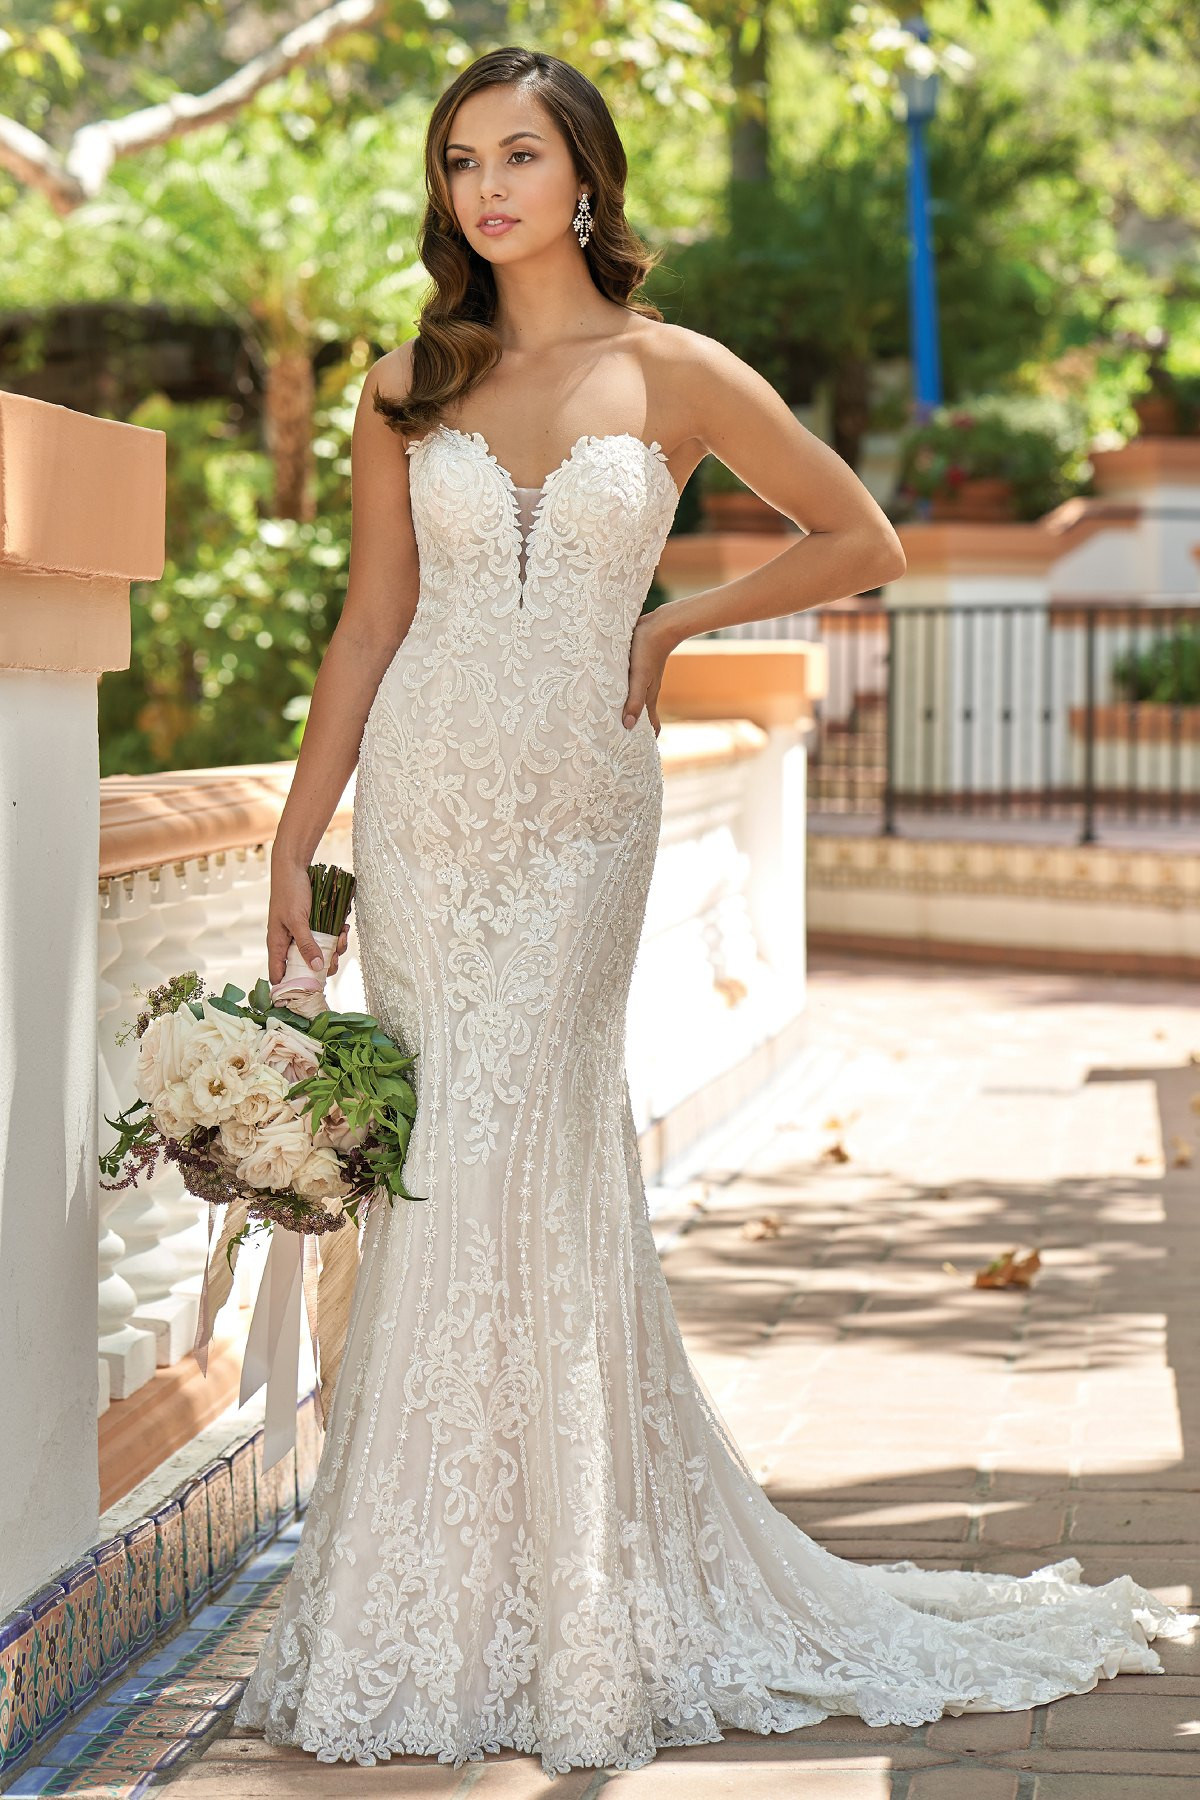 Strapless Wedding Gown
 T Romantic Embroidered Lace Strapless Wedding Dress